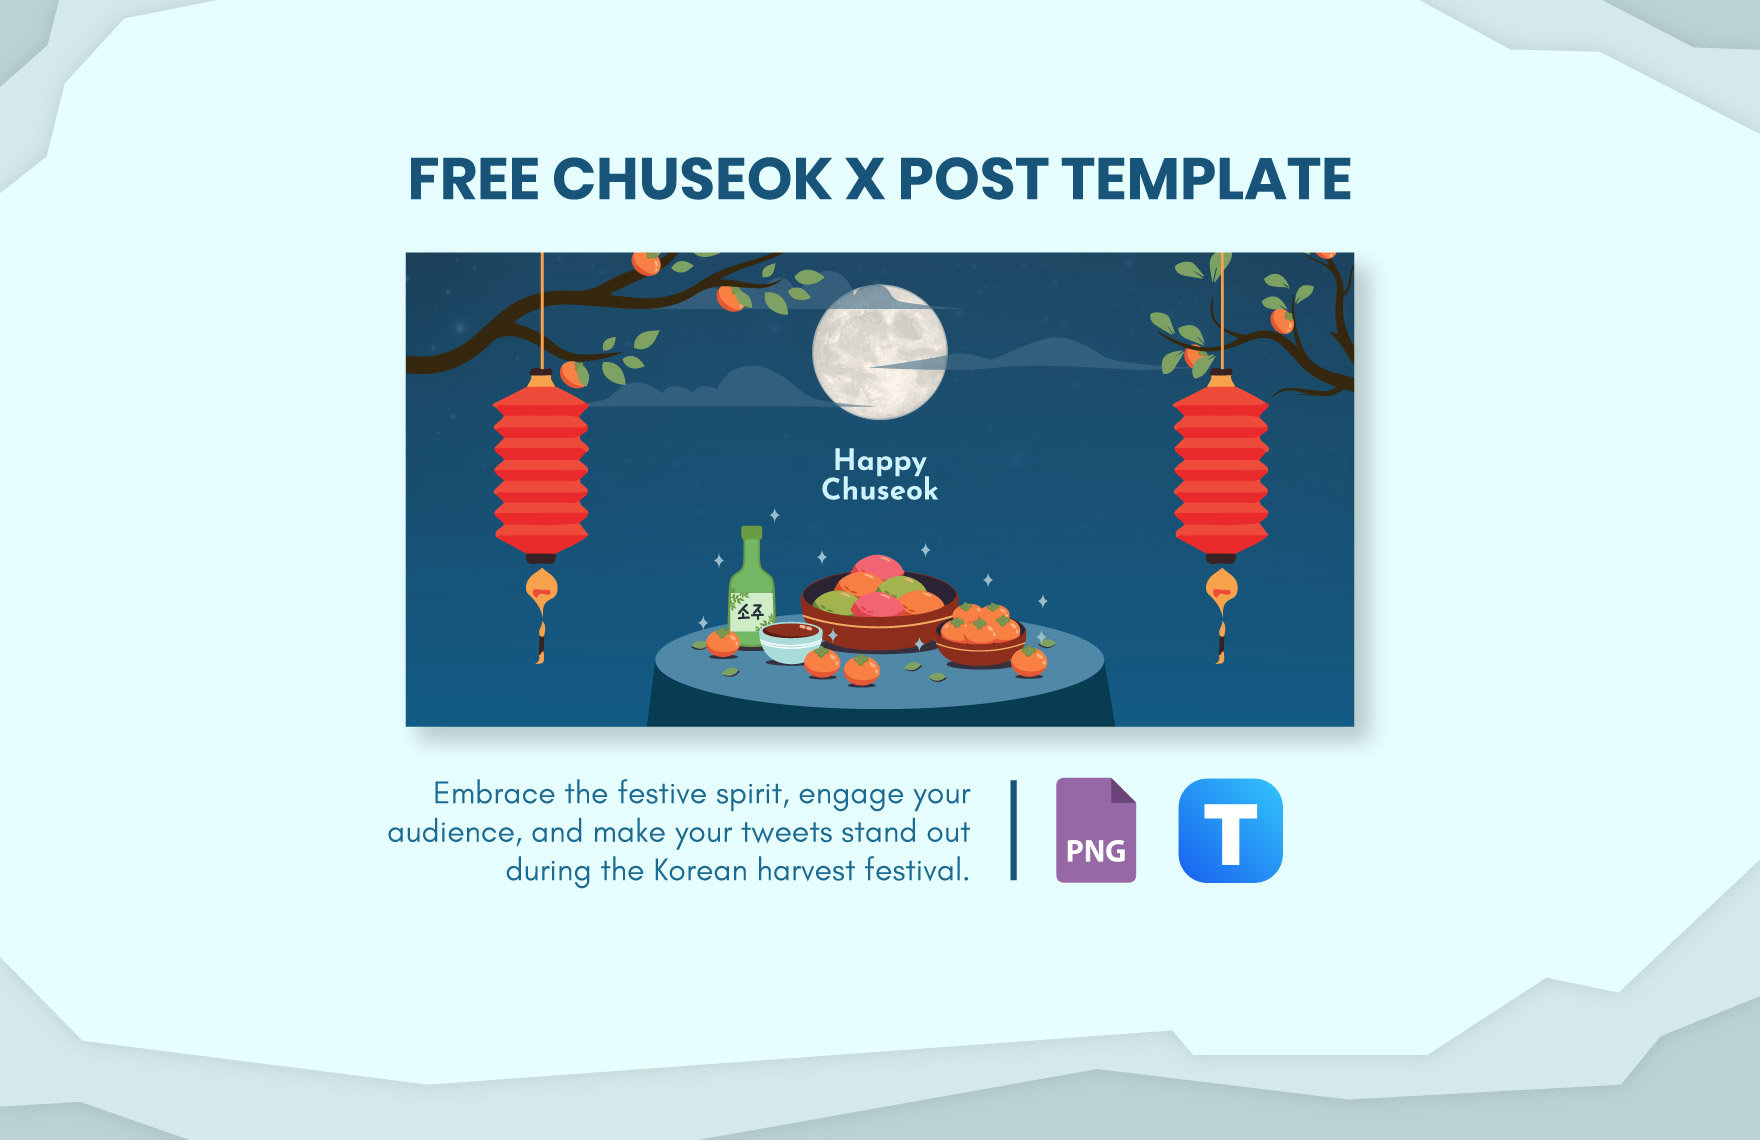 Free Chuseok X Post Template in PNG